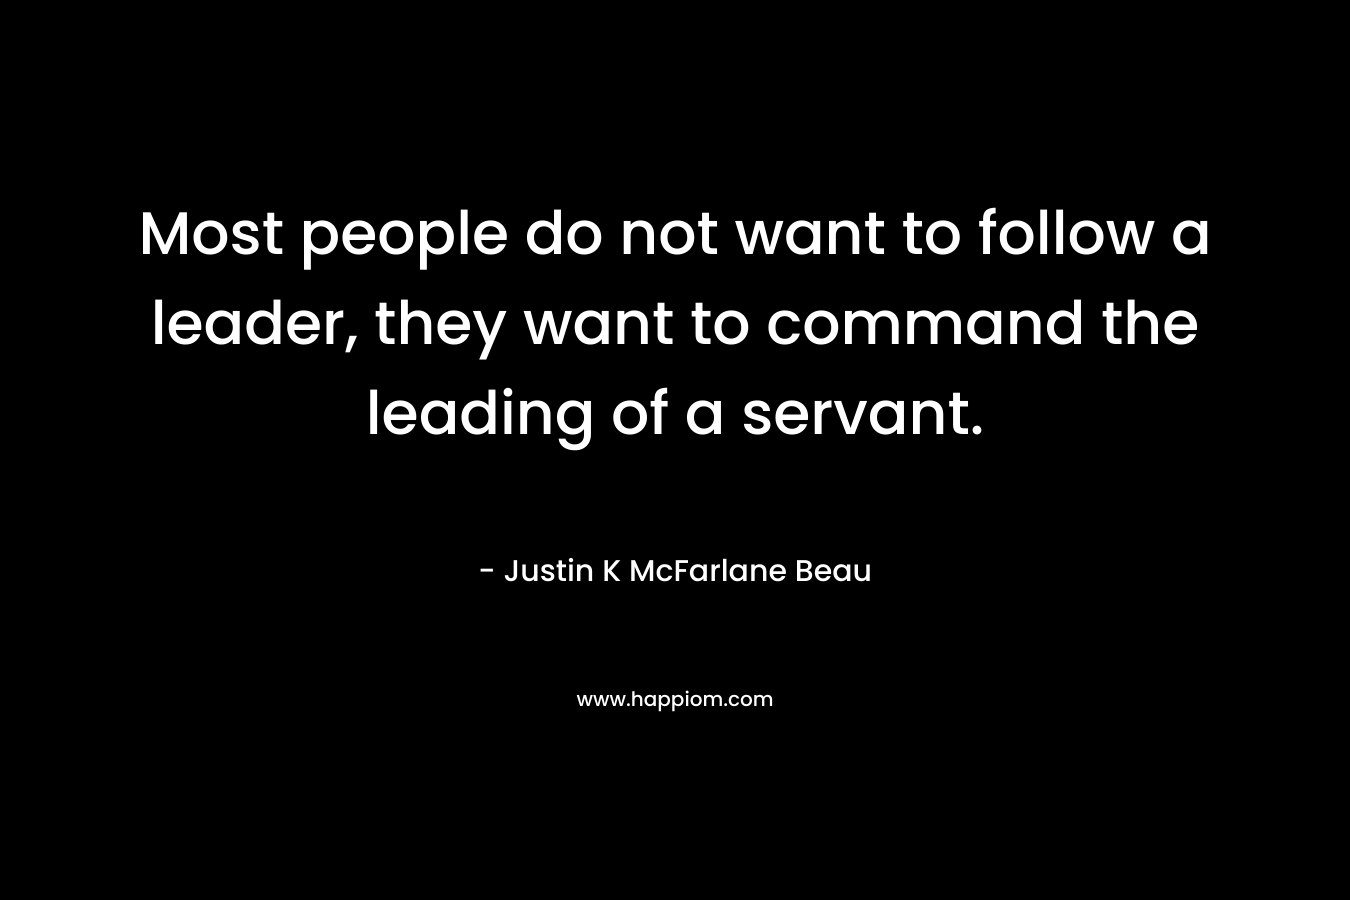 Most people do not want to follow a leader, they want to command the leading of a servant.